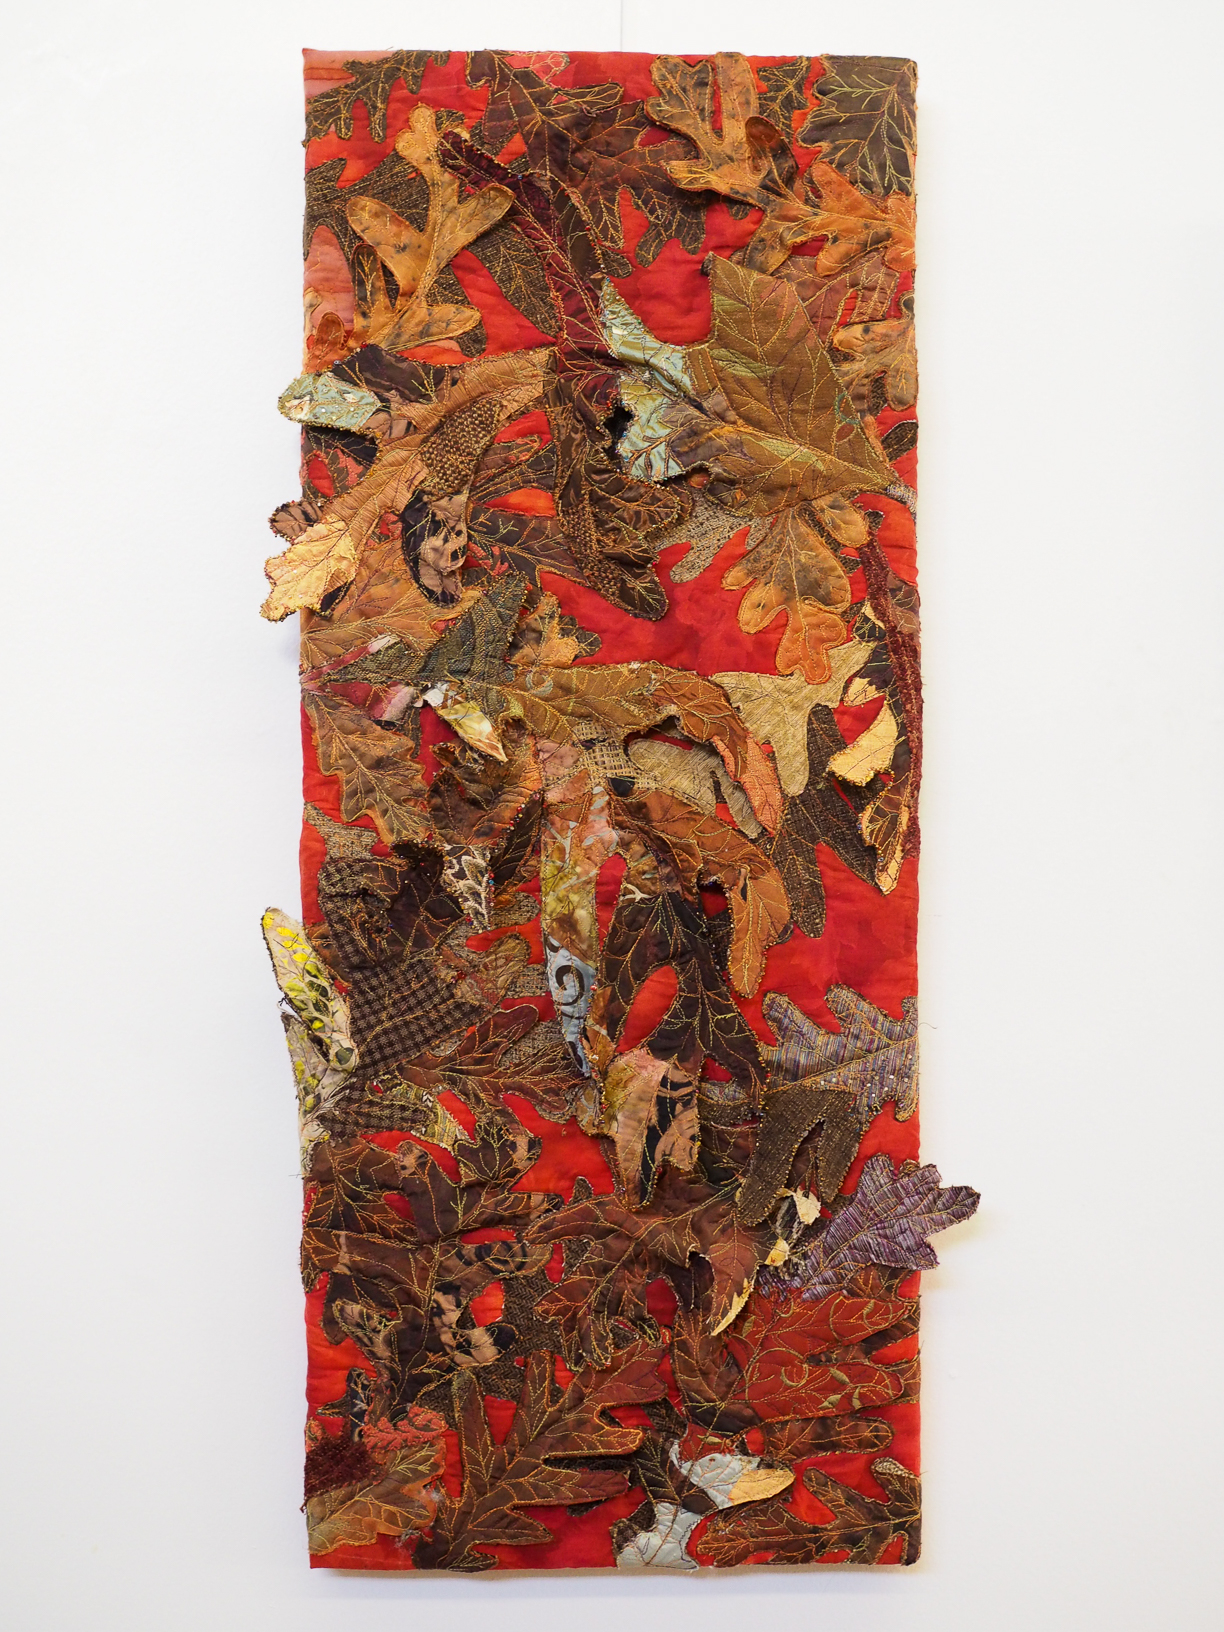 Quercus Falling Leaves II: White Oak Leaves in Red